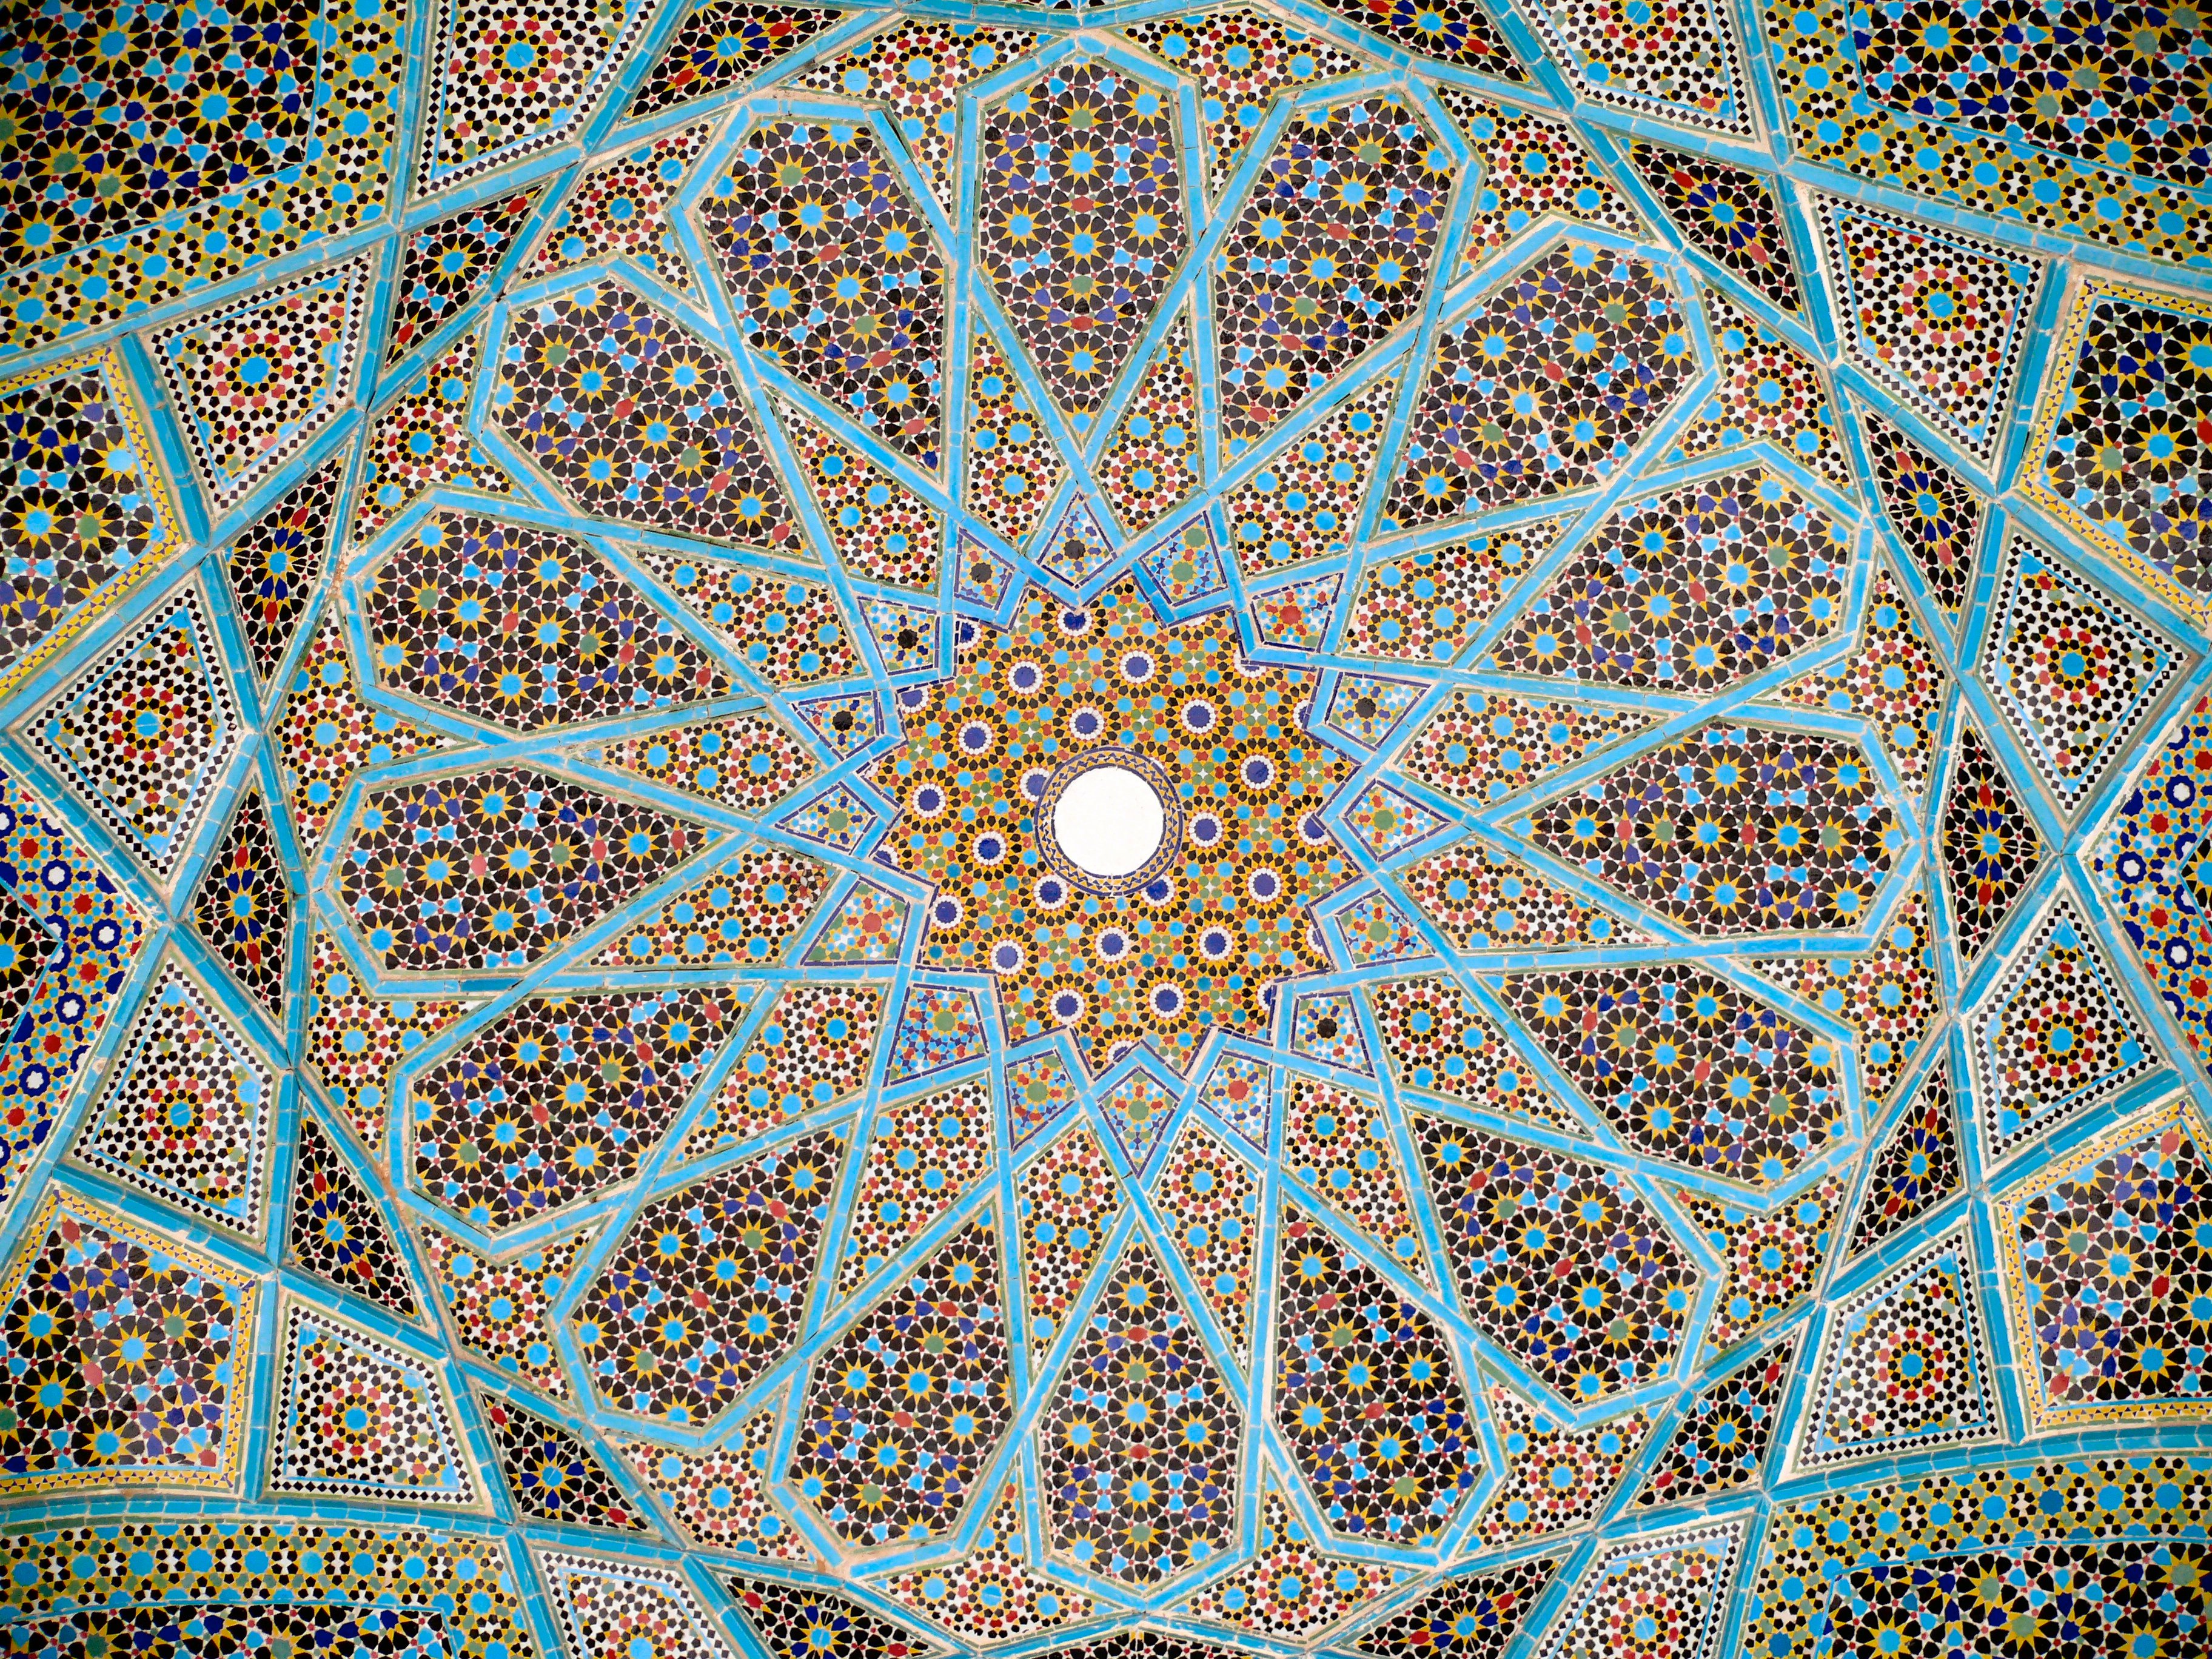 Roof Of The Tomb Persian Poet Hafez At Shiraz Iran Province